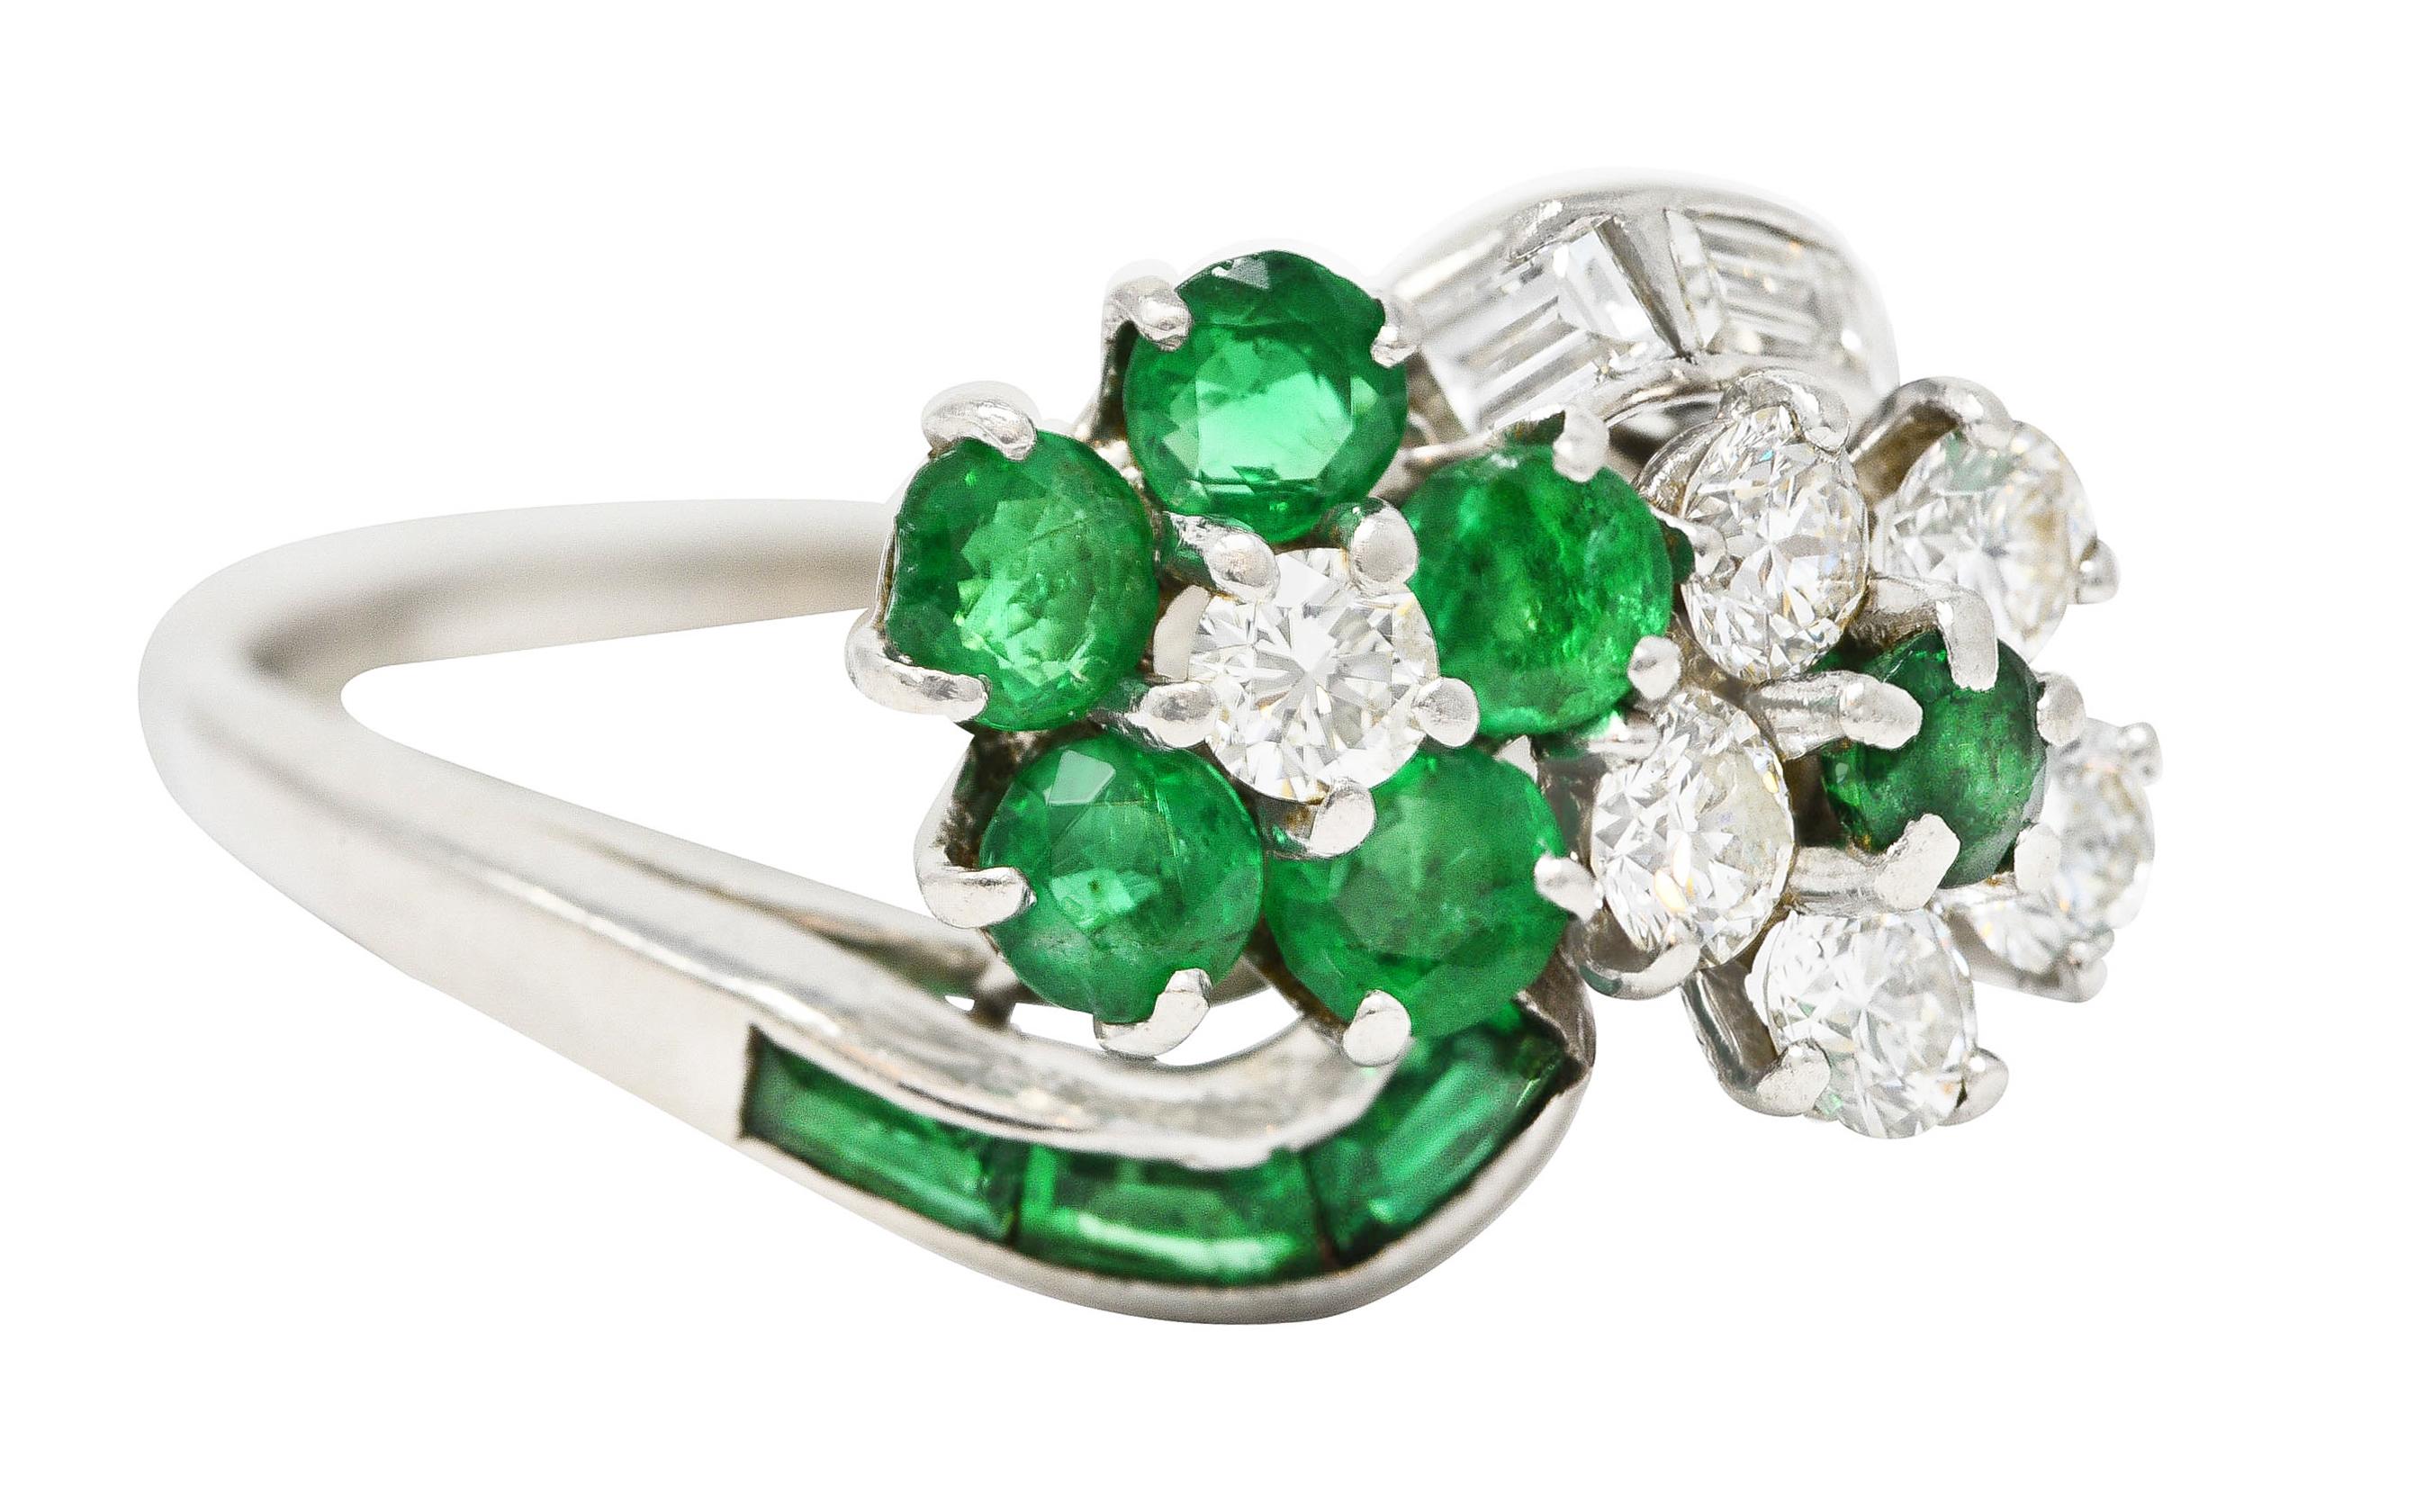 Designed as a bypass style ring terminating with two floral motif clusters of prong set emeralds and diamonds. With additional baguette cut emeralds and diamonds channel set in shoulders. Emeralds weigh approximately 0.73 carat total - transparent